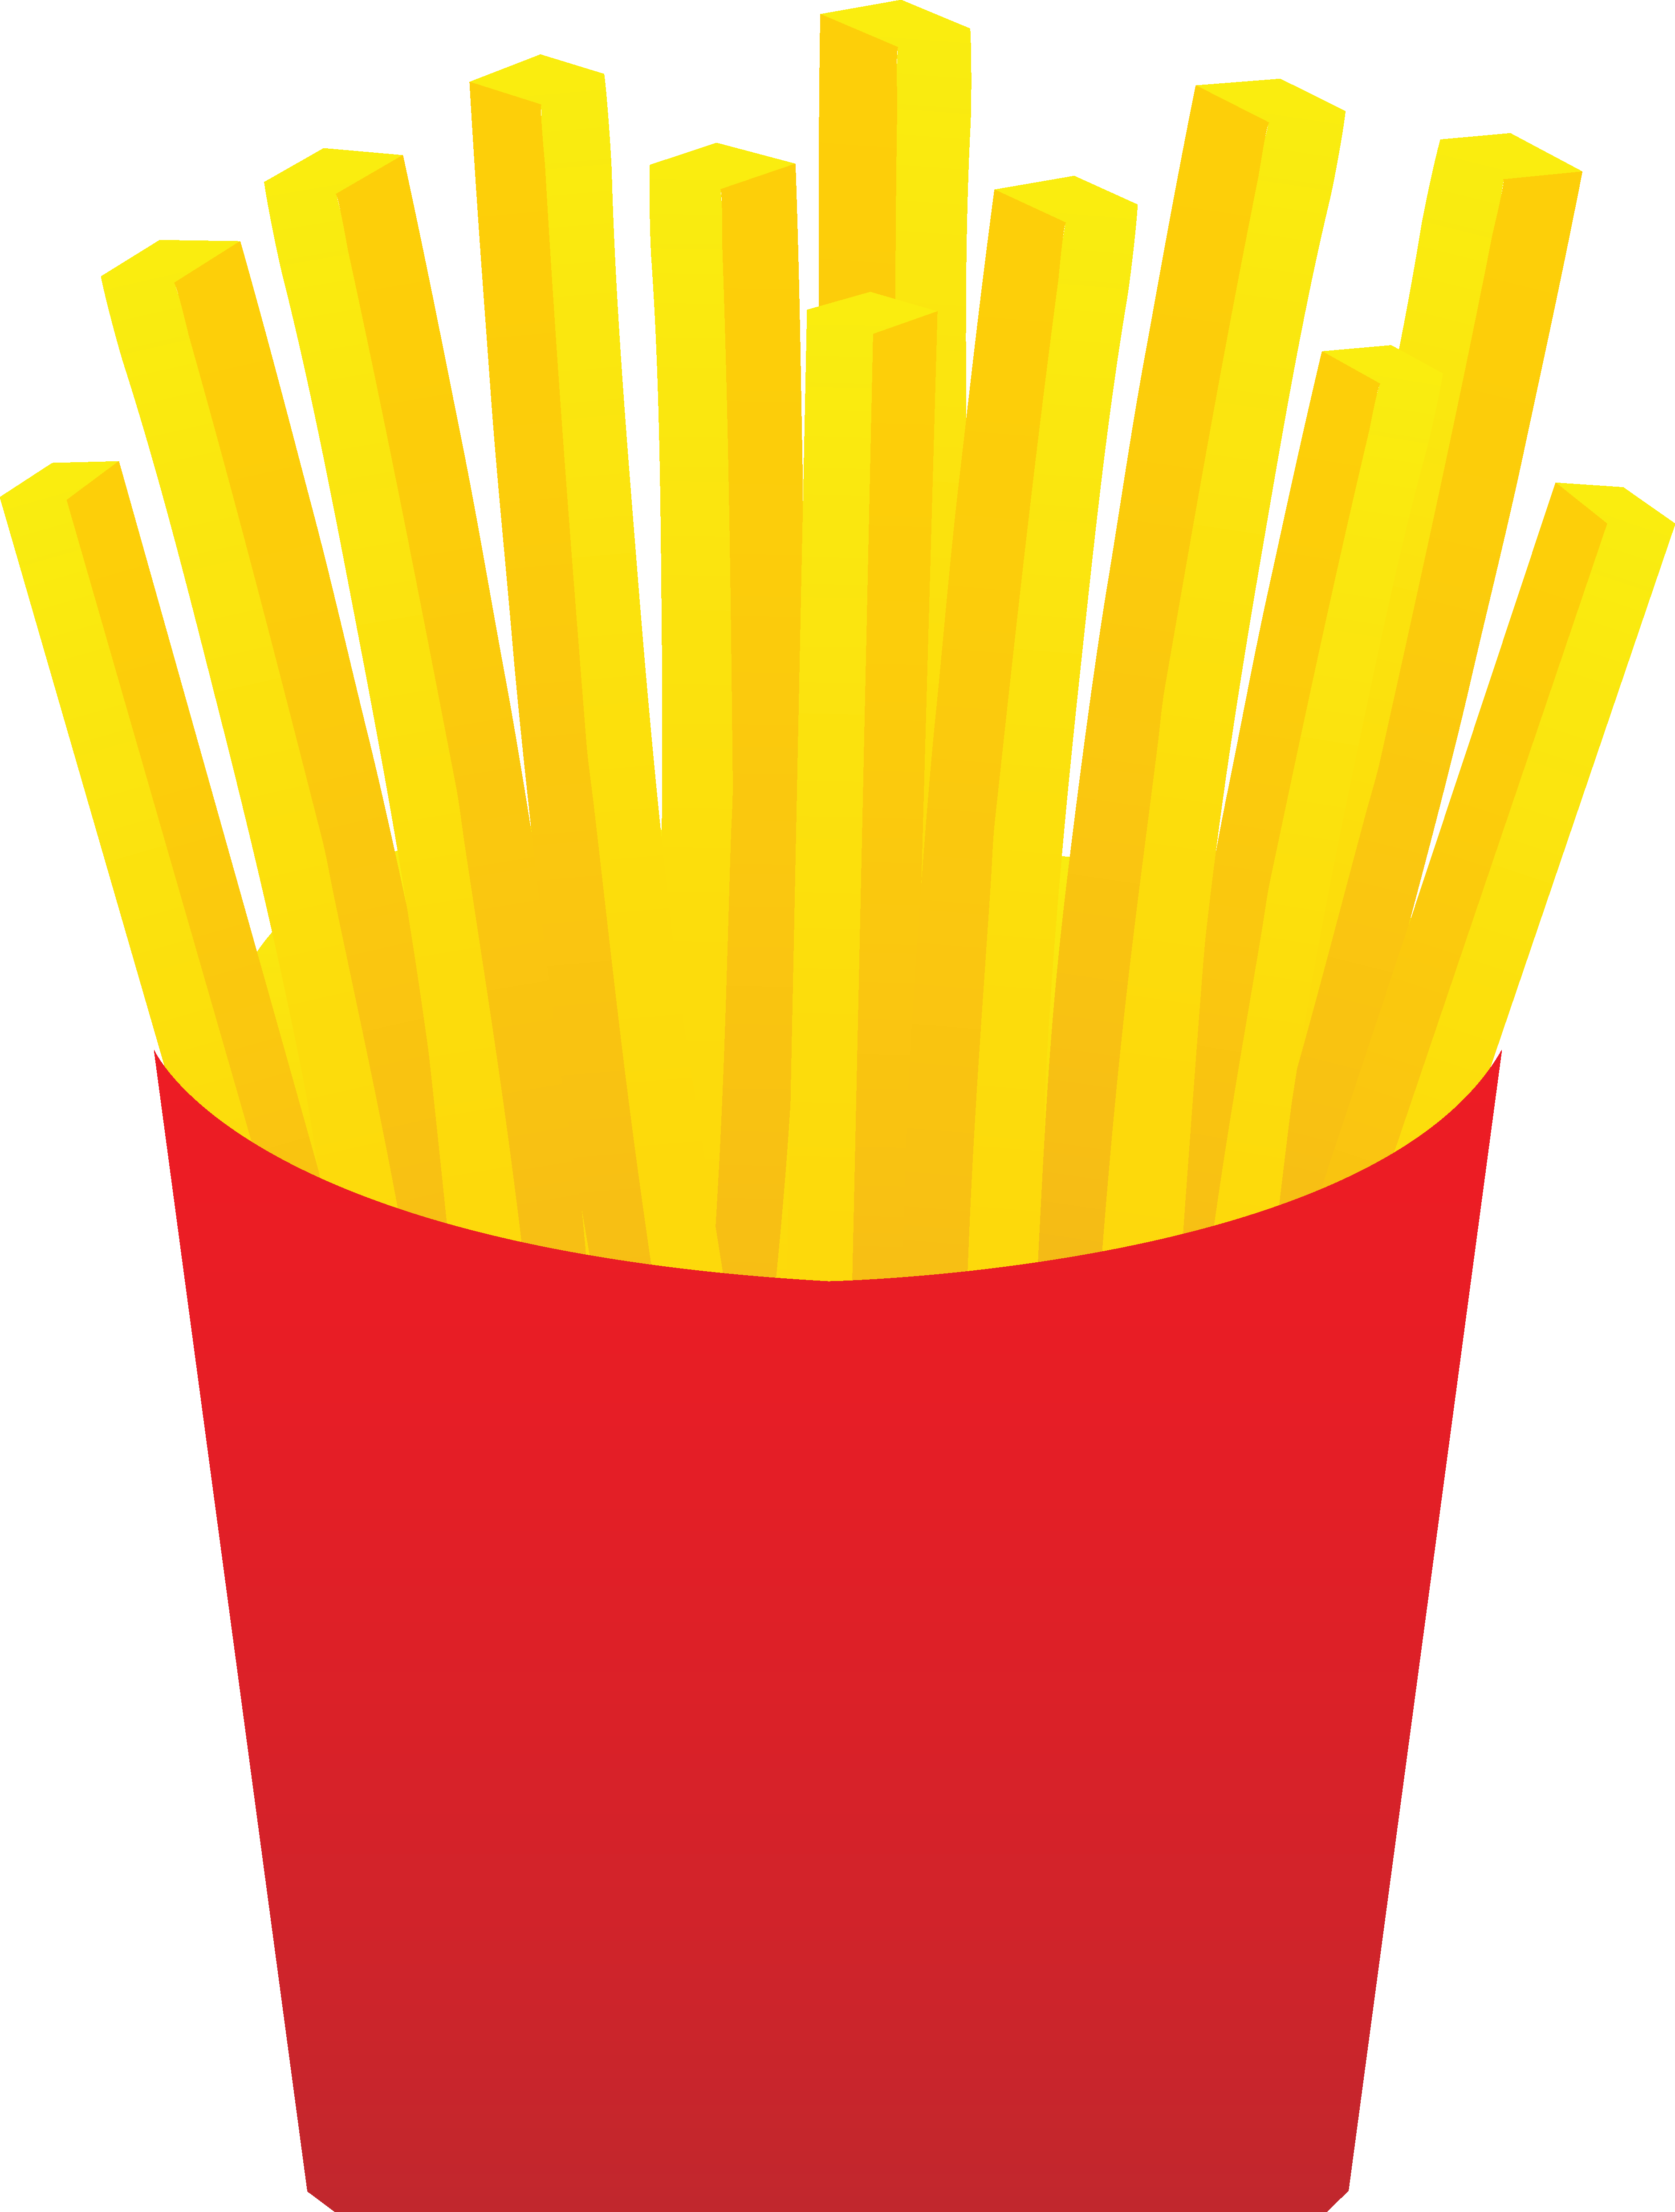 French Fries Clip Art Tumundografico Clipart Best Clipart Best